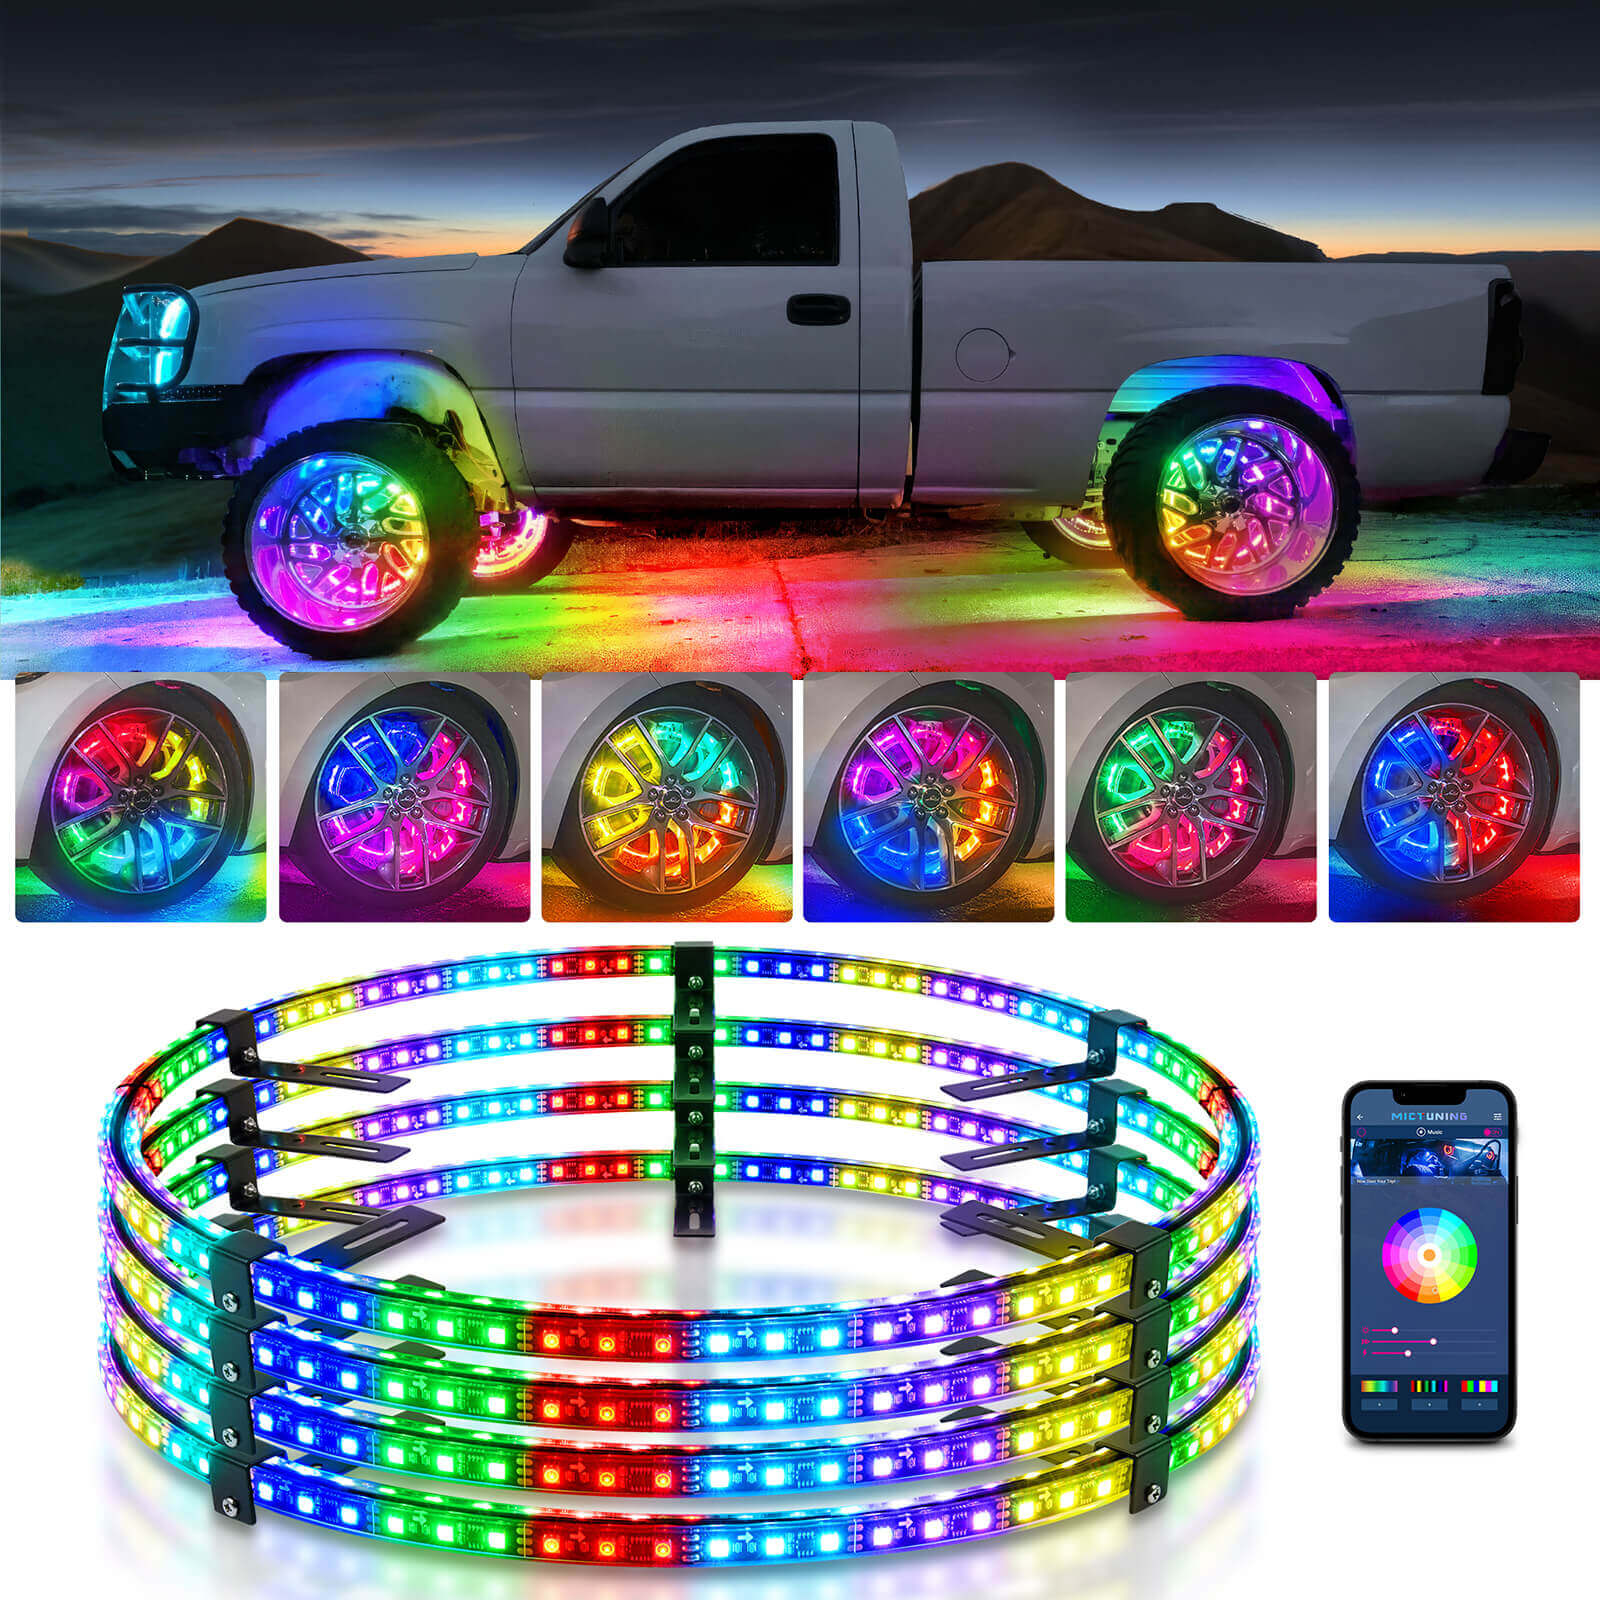 17'' Double-Row RGB + IC Wheel Ring Lights Kit MICTUNING, Chasing Color Flow Neon Wheel Rim Lights for Pickup Truck Car SUV